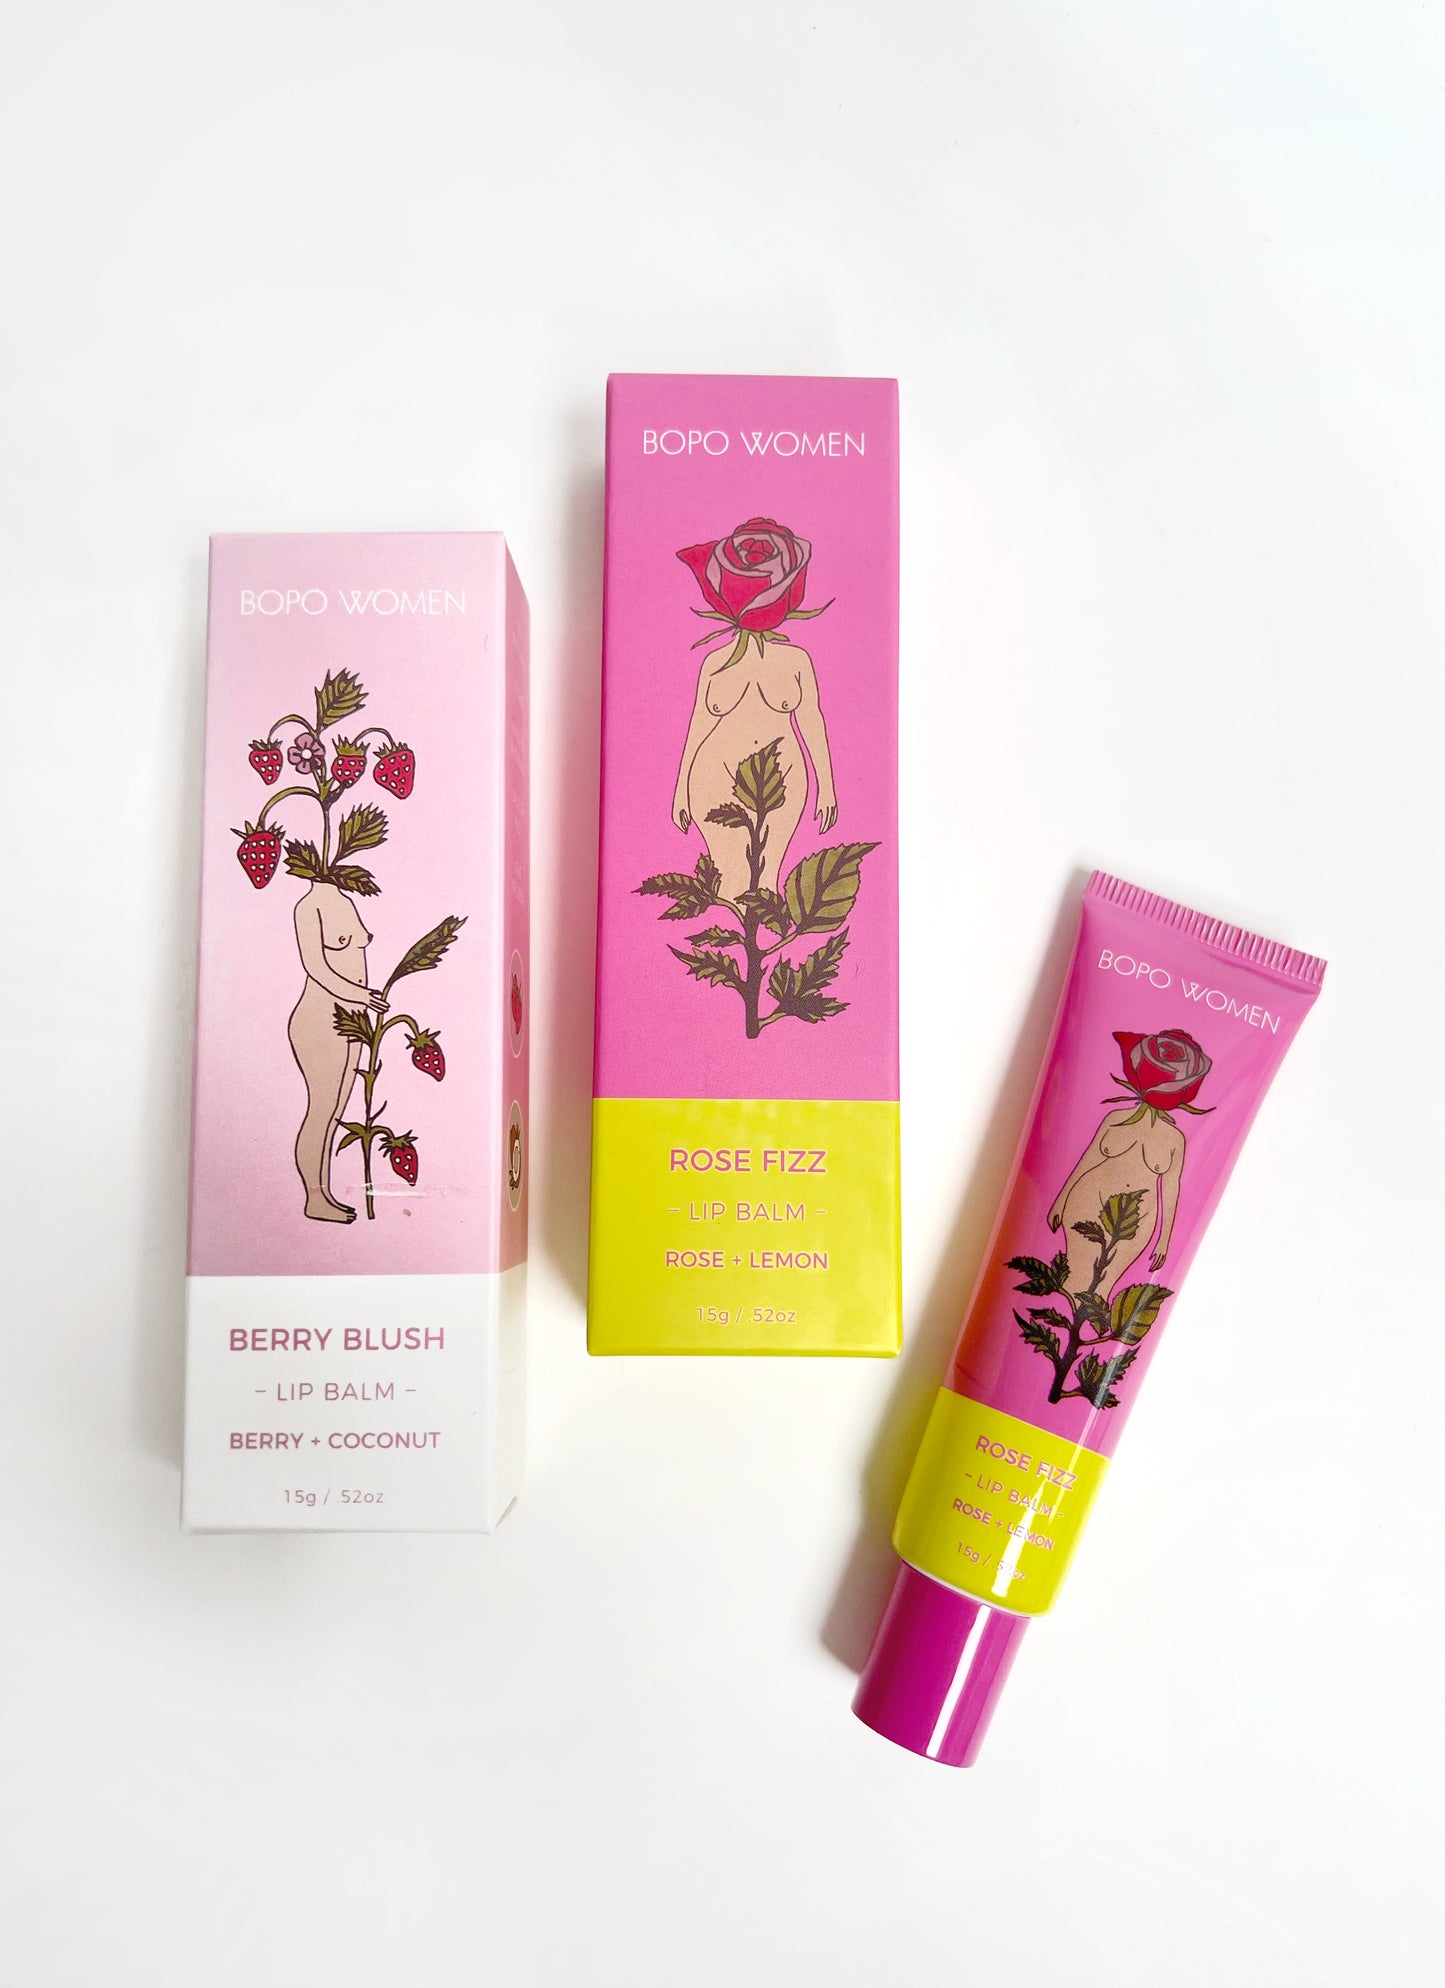 Berry Blush berry and coconut and Rose Fizz Rose and Lemon flavoured lip balms by Bopo Women.